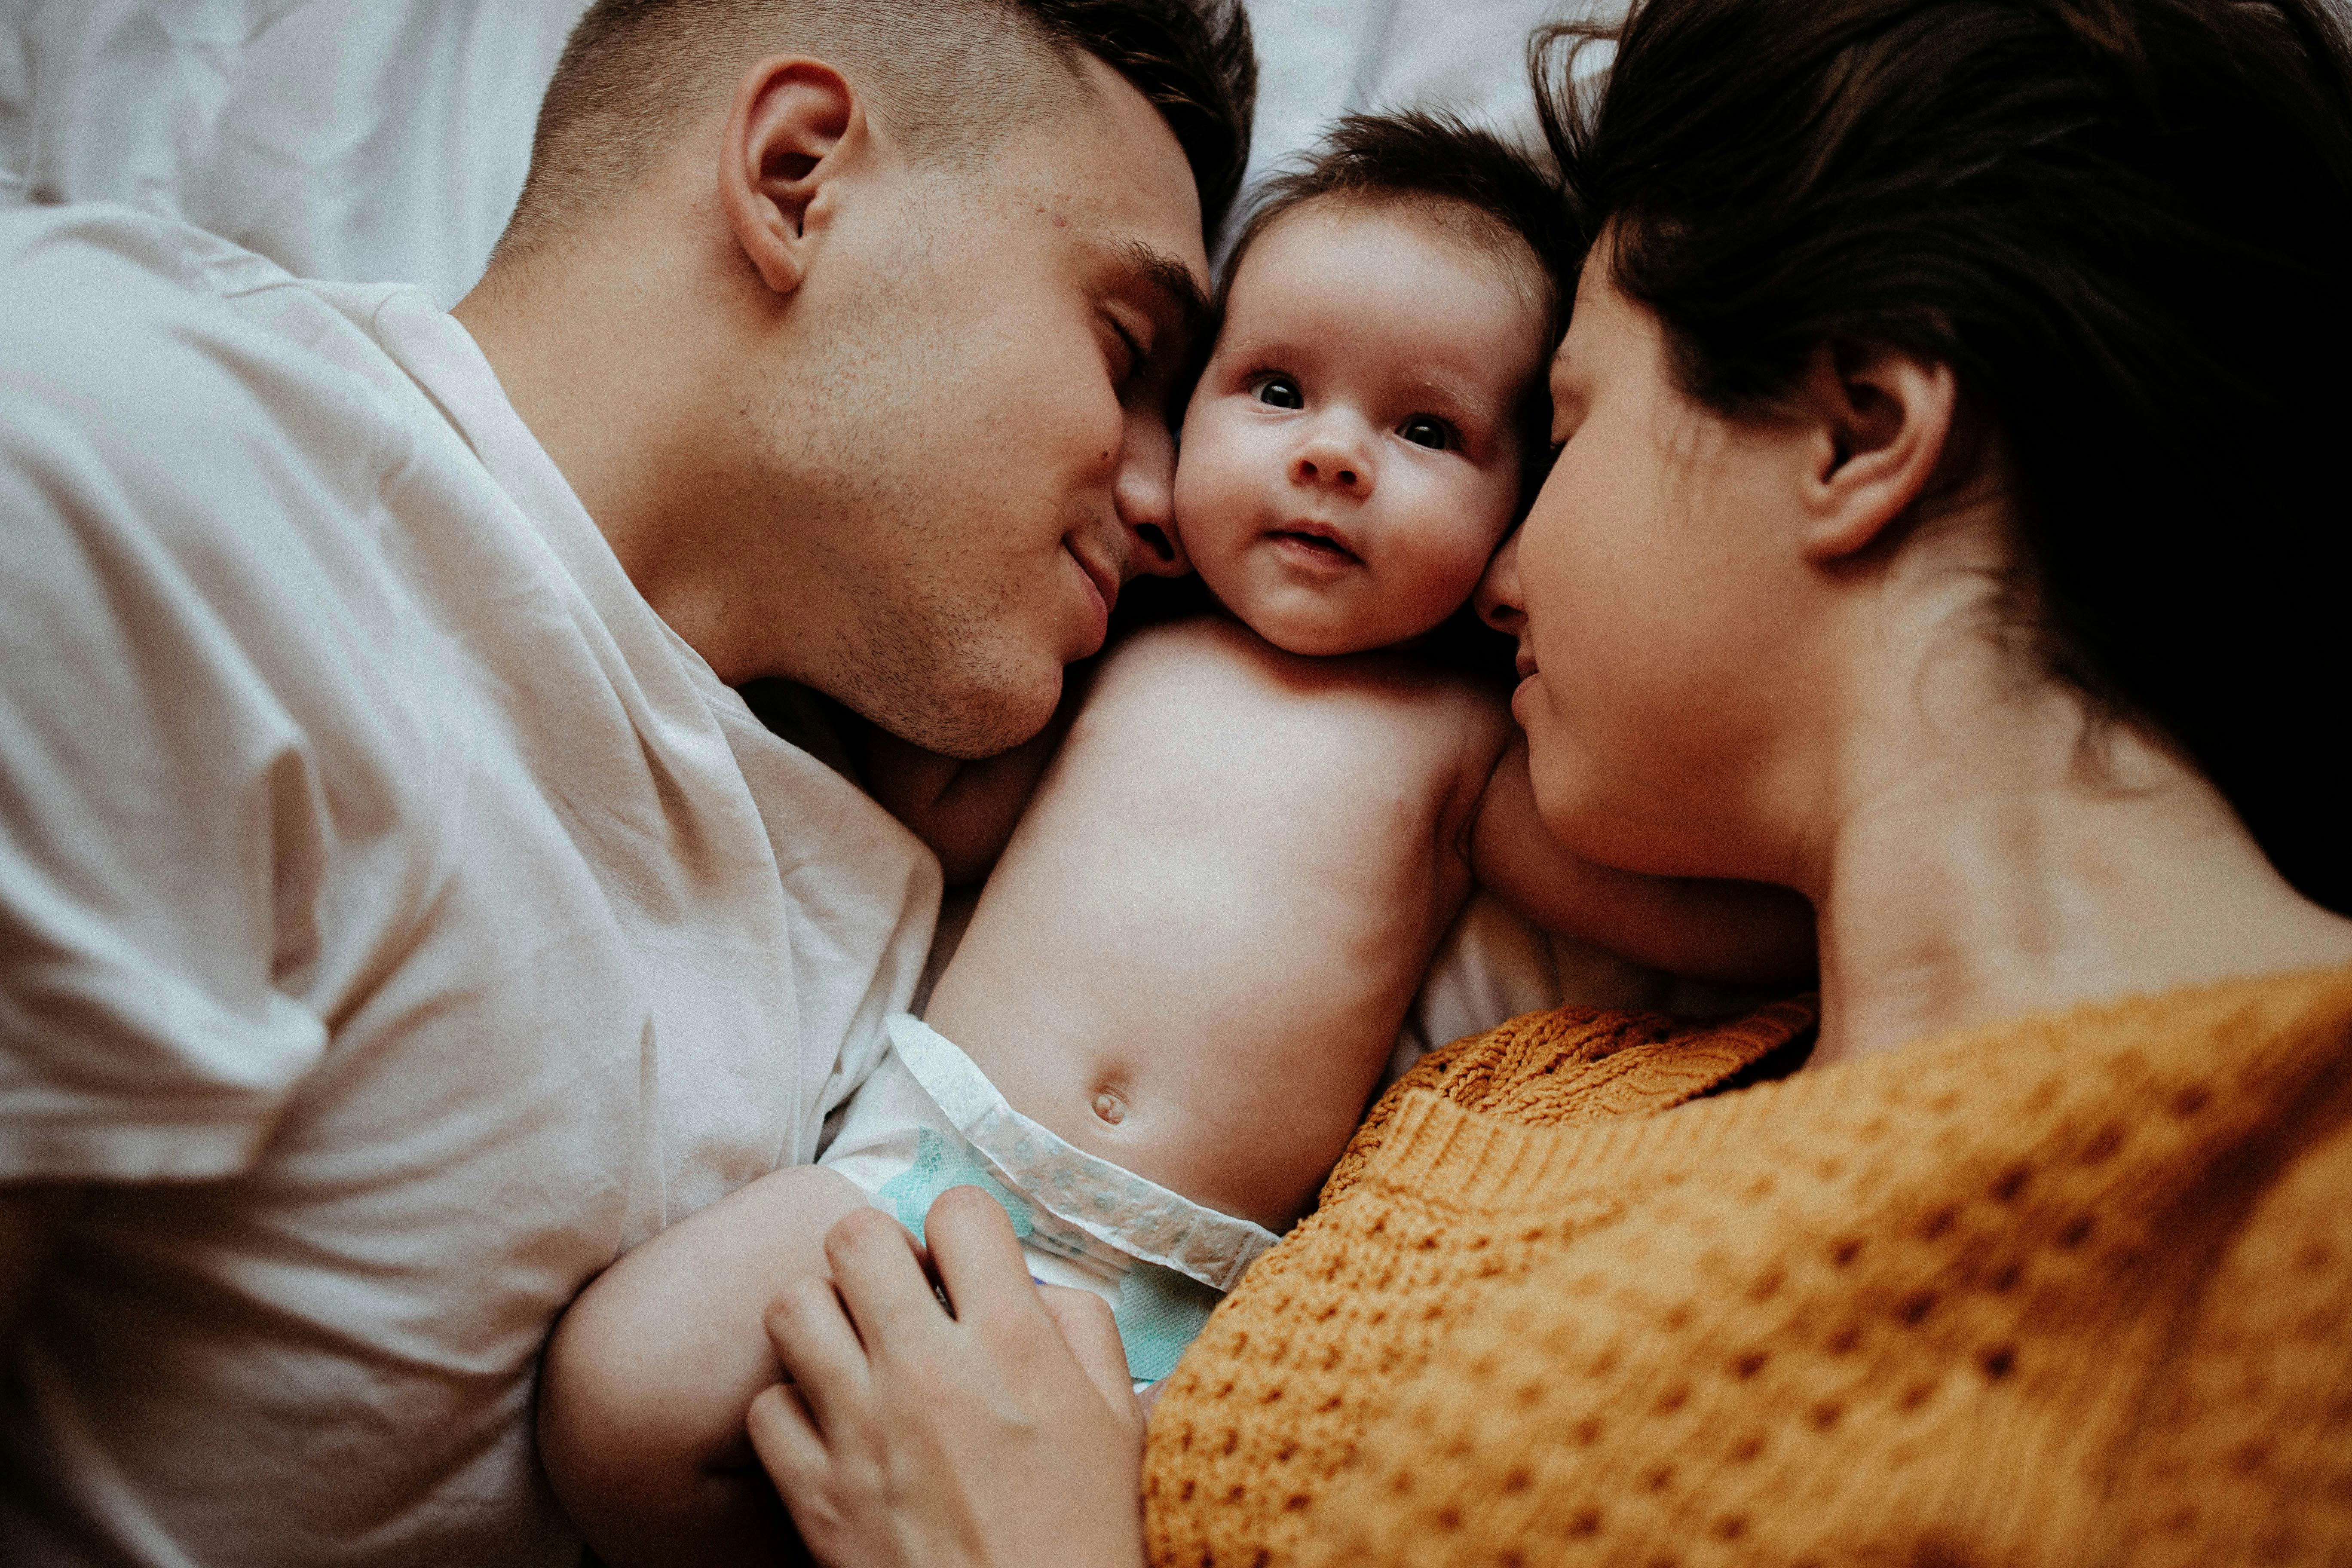 A couple cuddling their baby | Source: Pexels